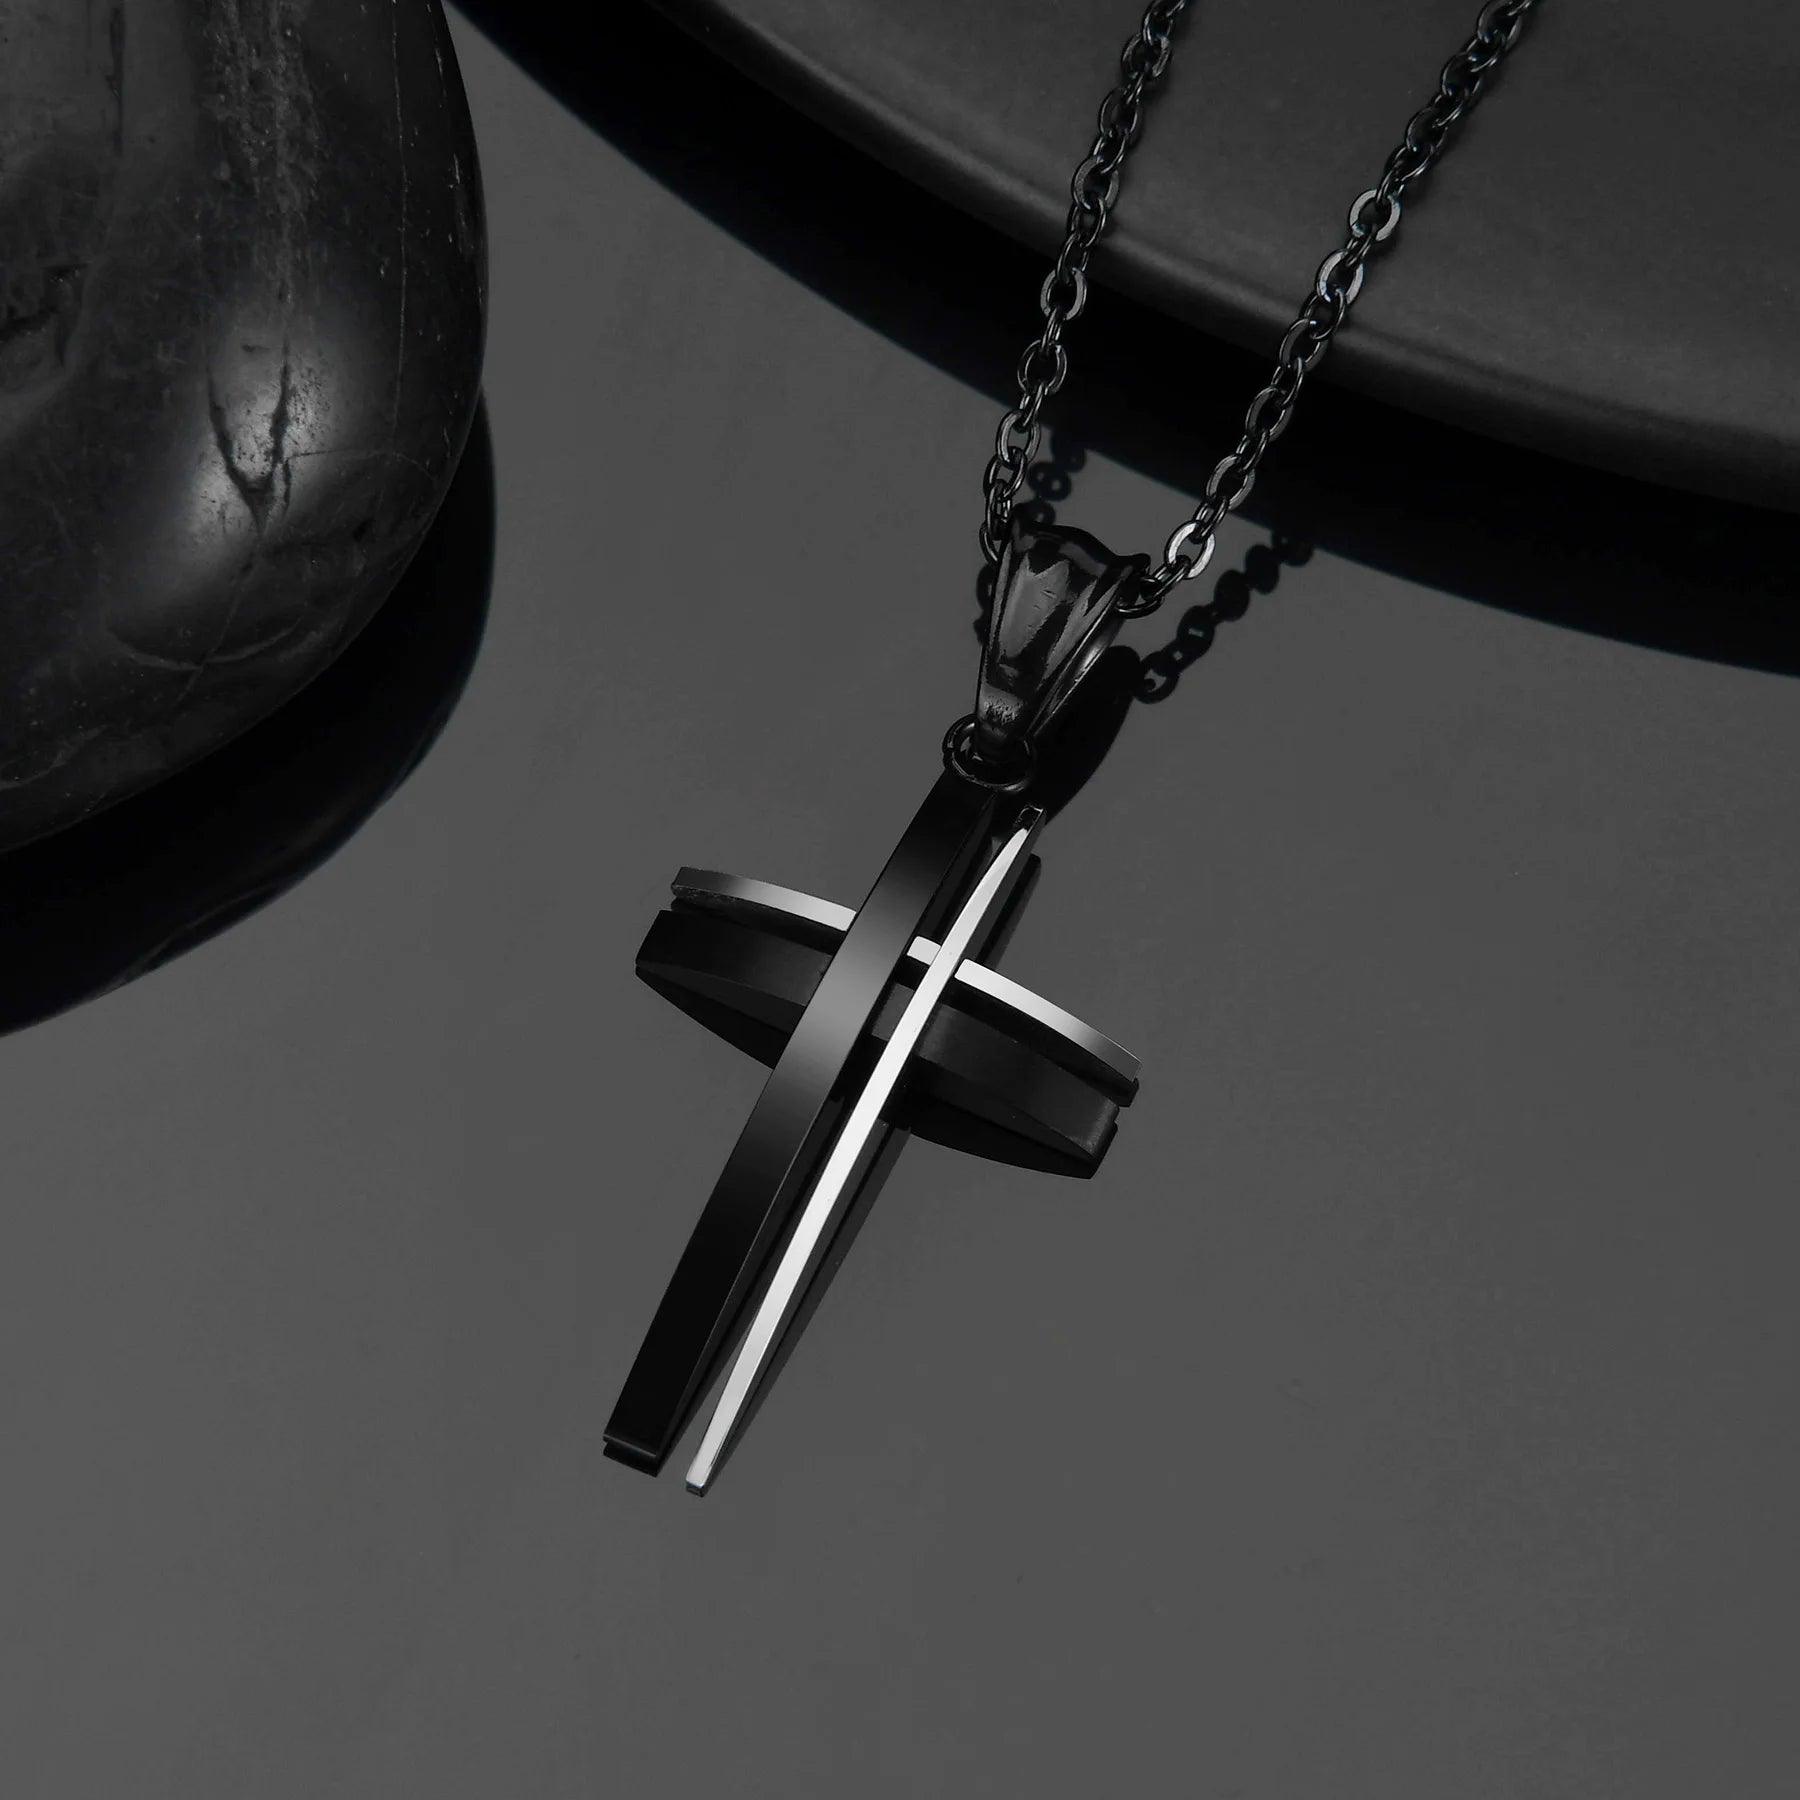 New Arrival Black Silver Gold Cross Unisex Stainless Steel Religious Holy Lord Christian Pendant Necklace - Ideal Gift - The Jewellery Supermarket